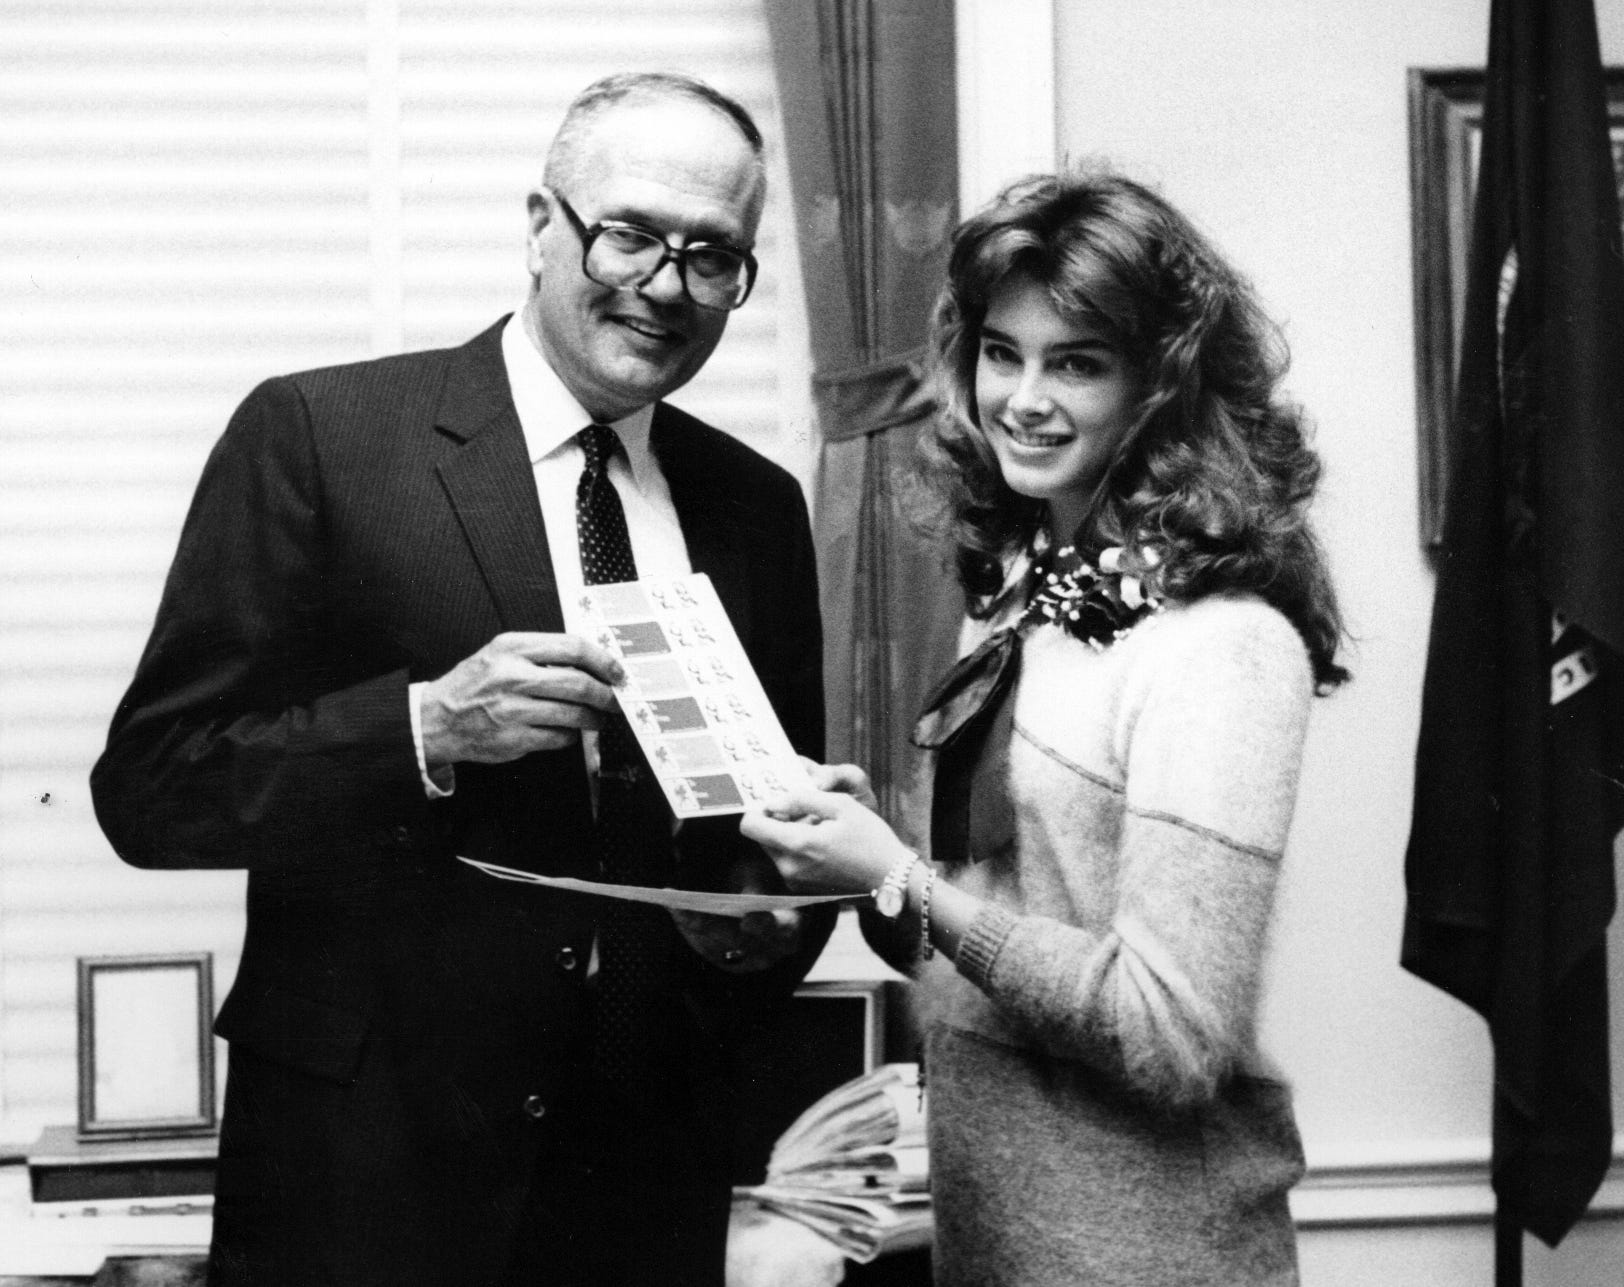 John Dingell and actress Brooke Shields are seen in an undated photo.